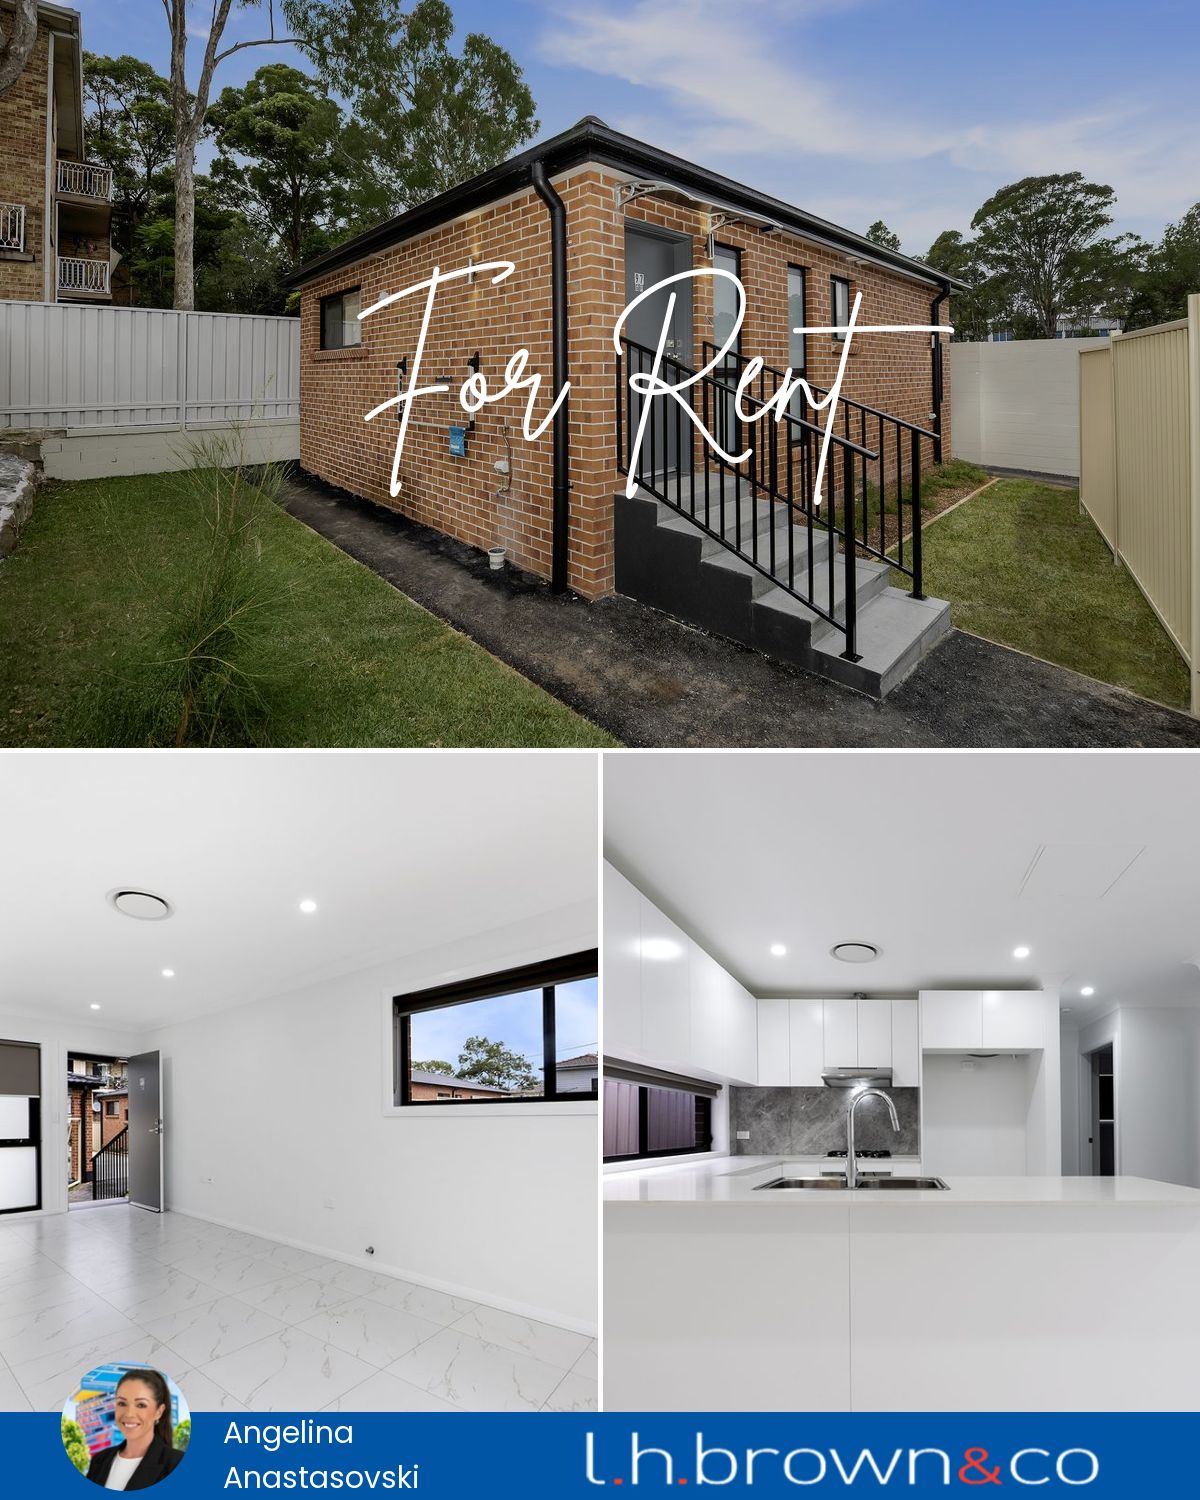 97A Meredith St, Bankstown, NSW 2200 | Realty.com.au